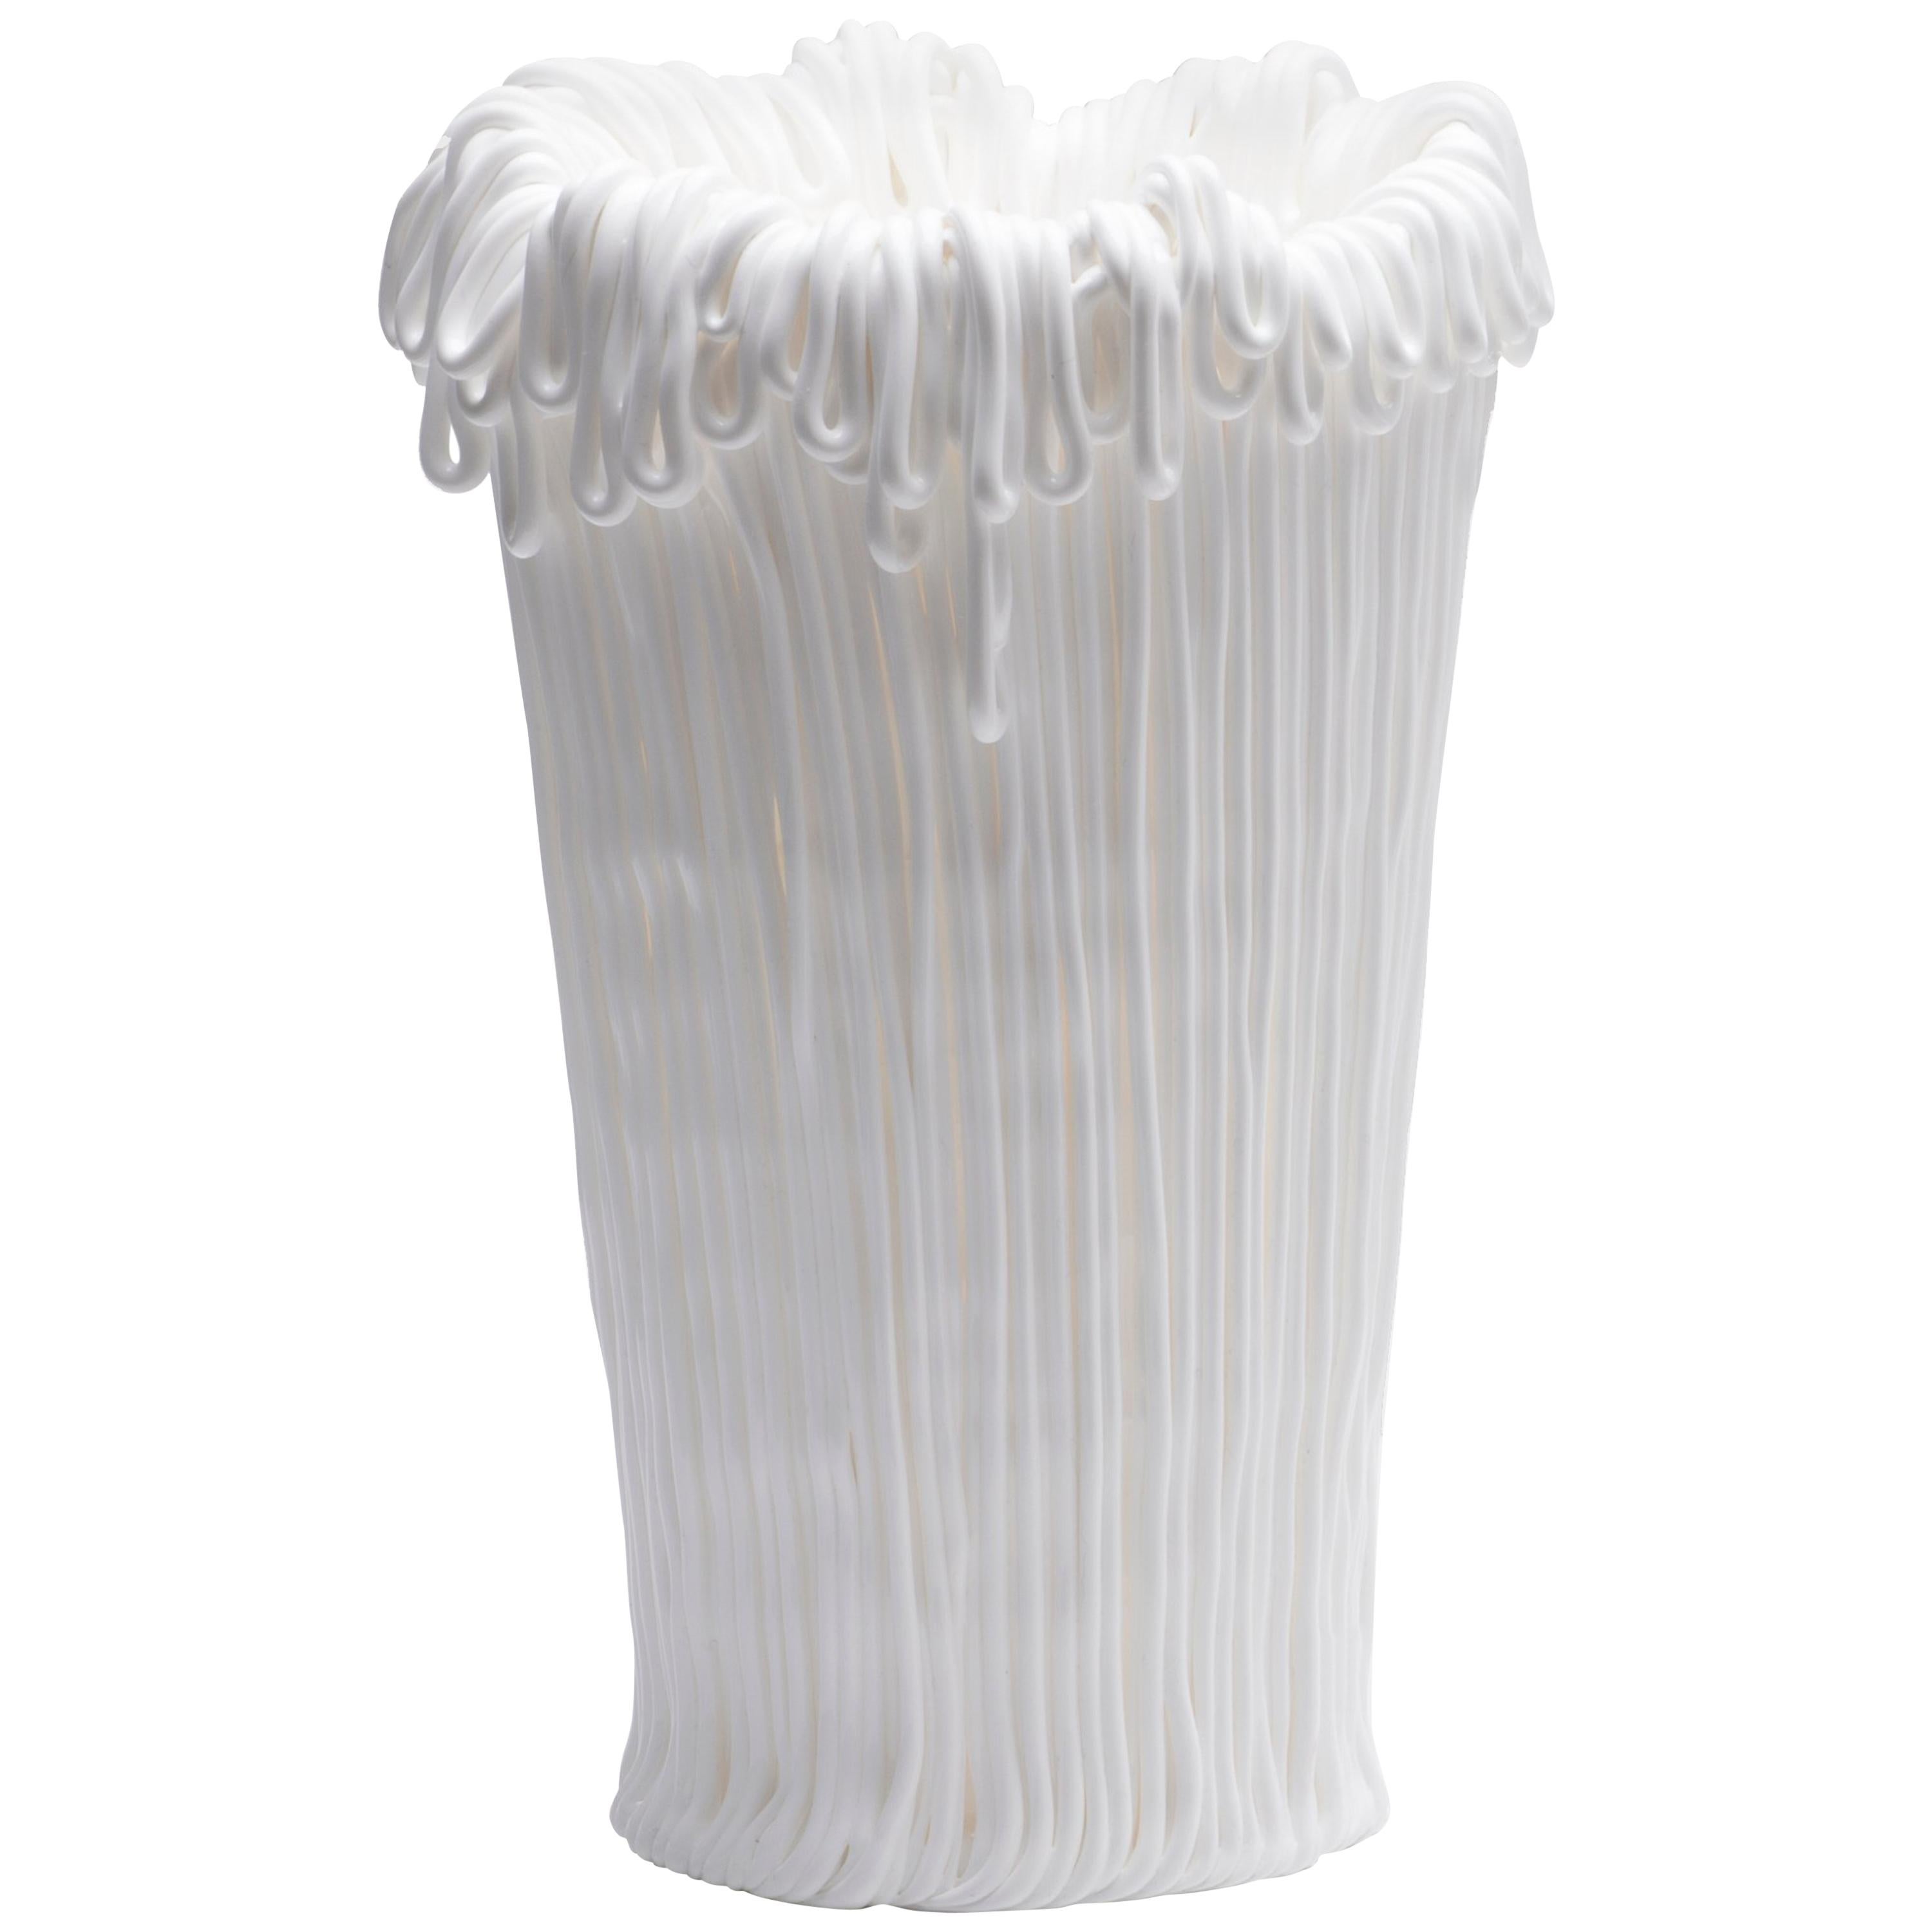 Established & Sons Frillo Vase with Handcrafted White Piping by Alessandro Ciffo